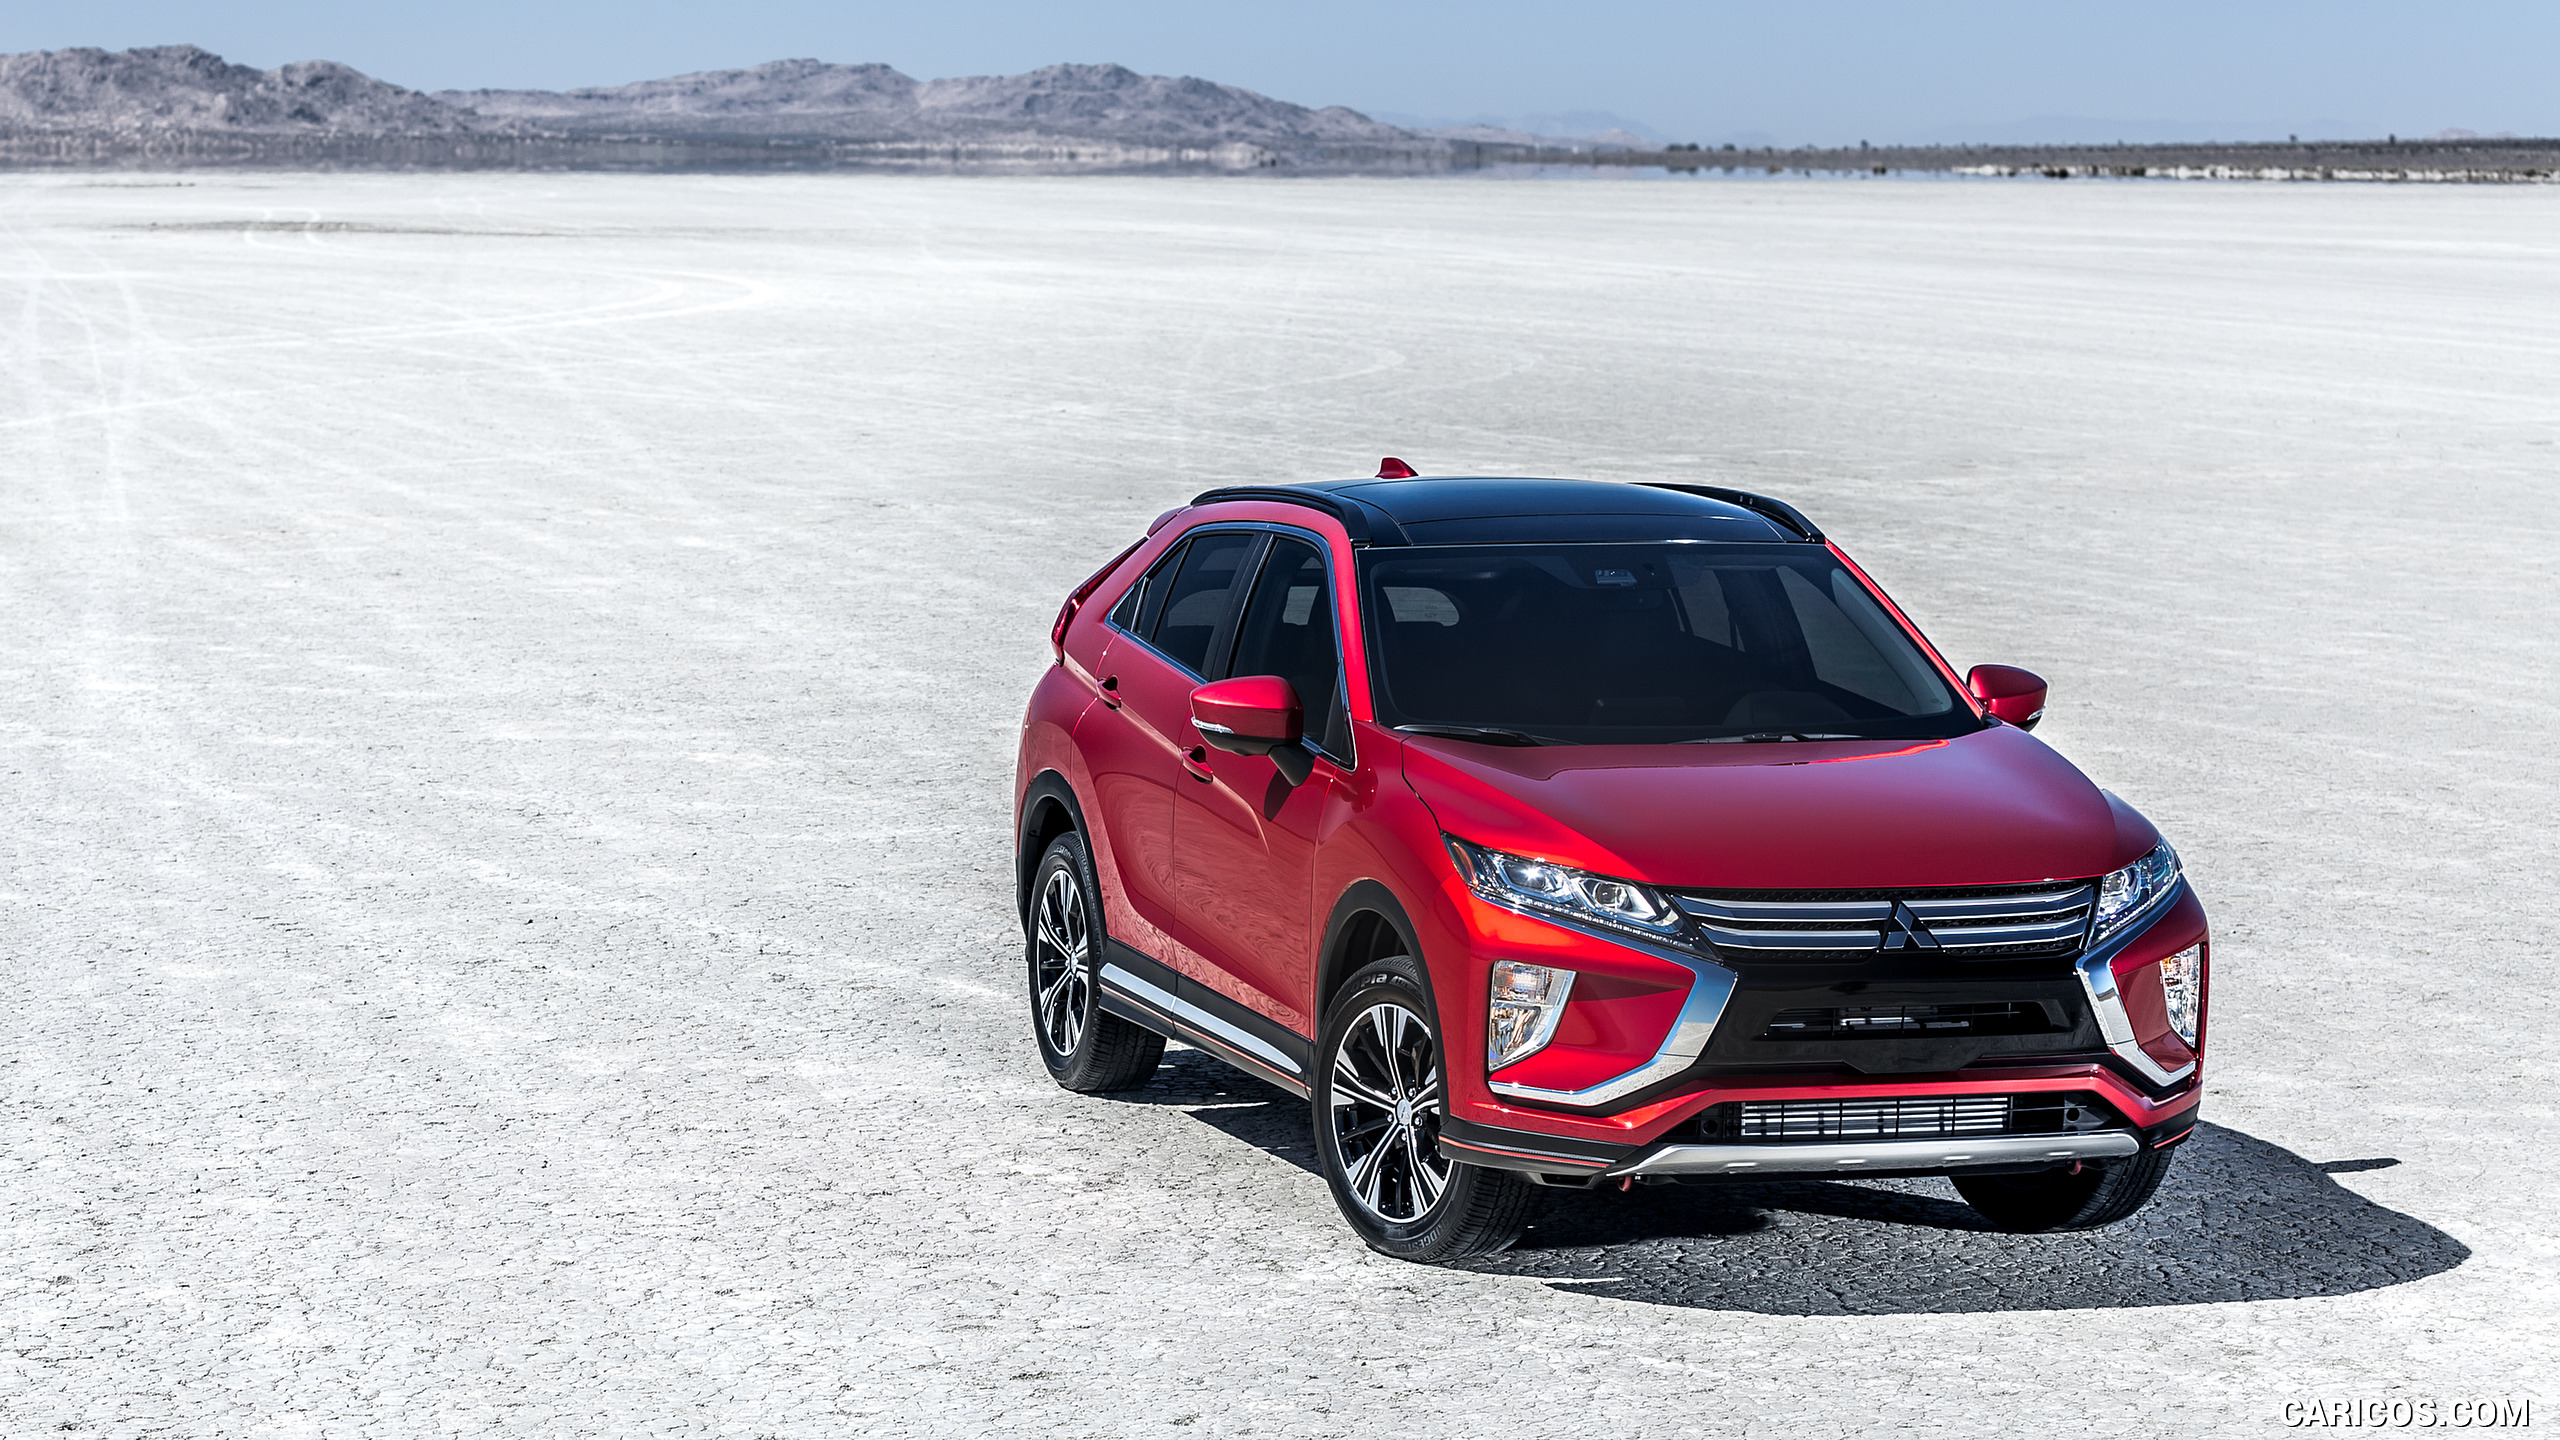 2018 Mitsubishi Eclipse Cross - Front, #7 of 173